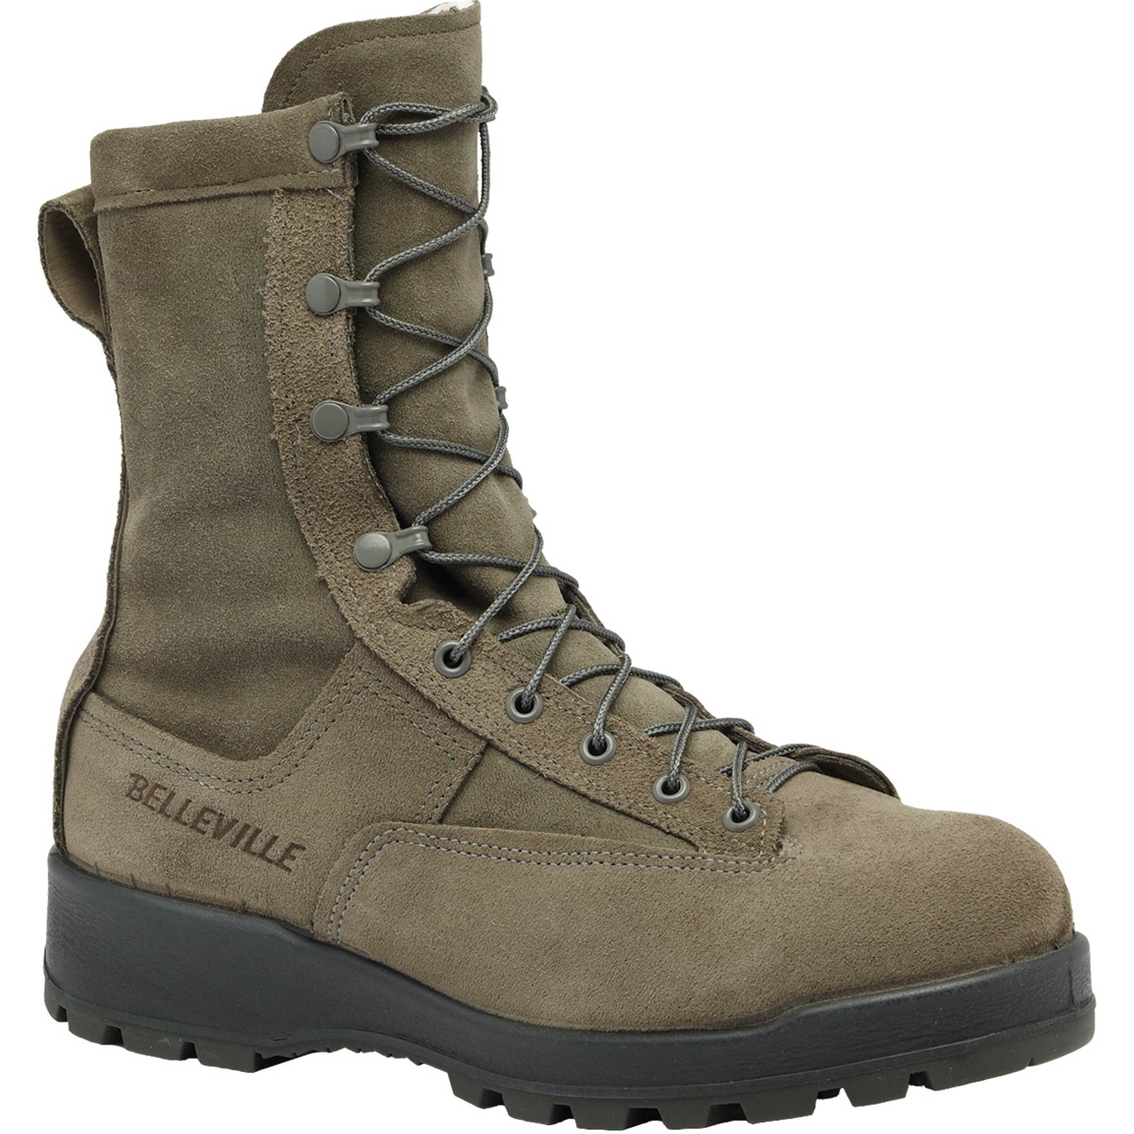 Belleville Boots Army - Army Military